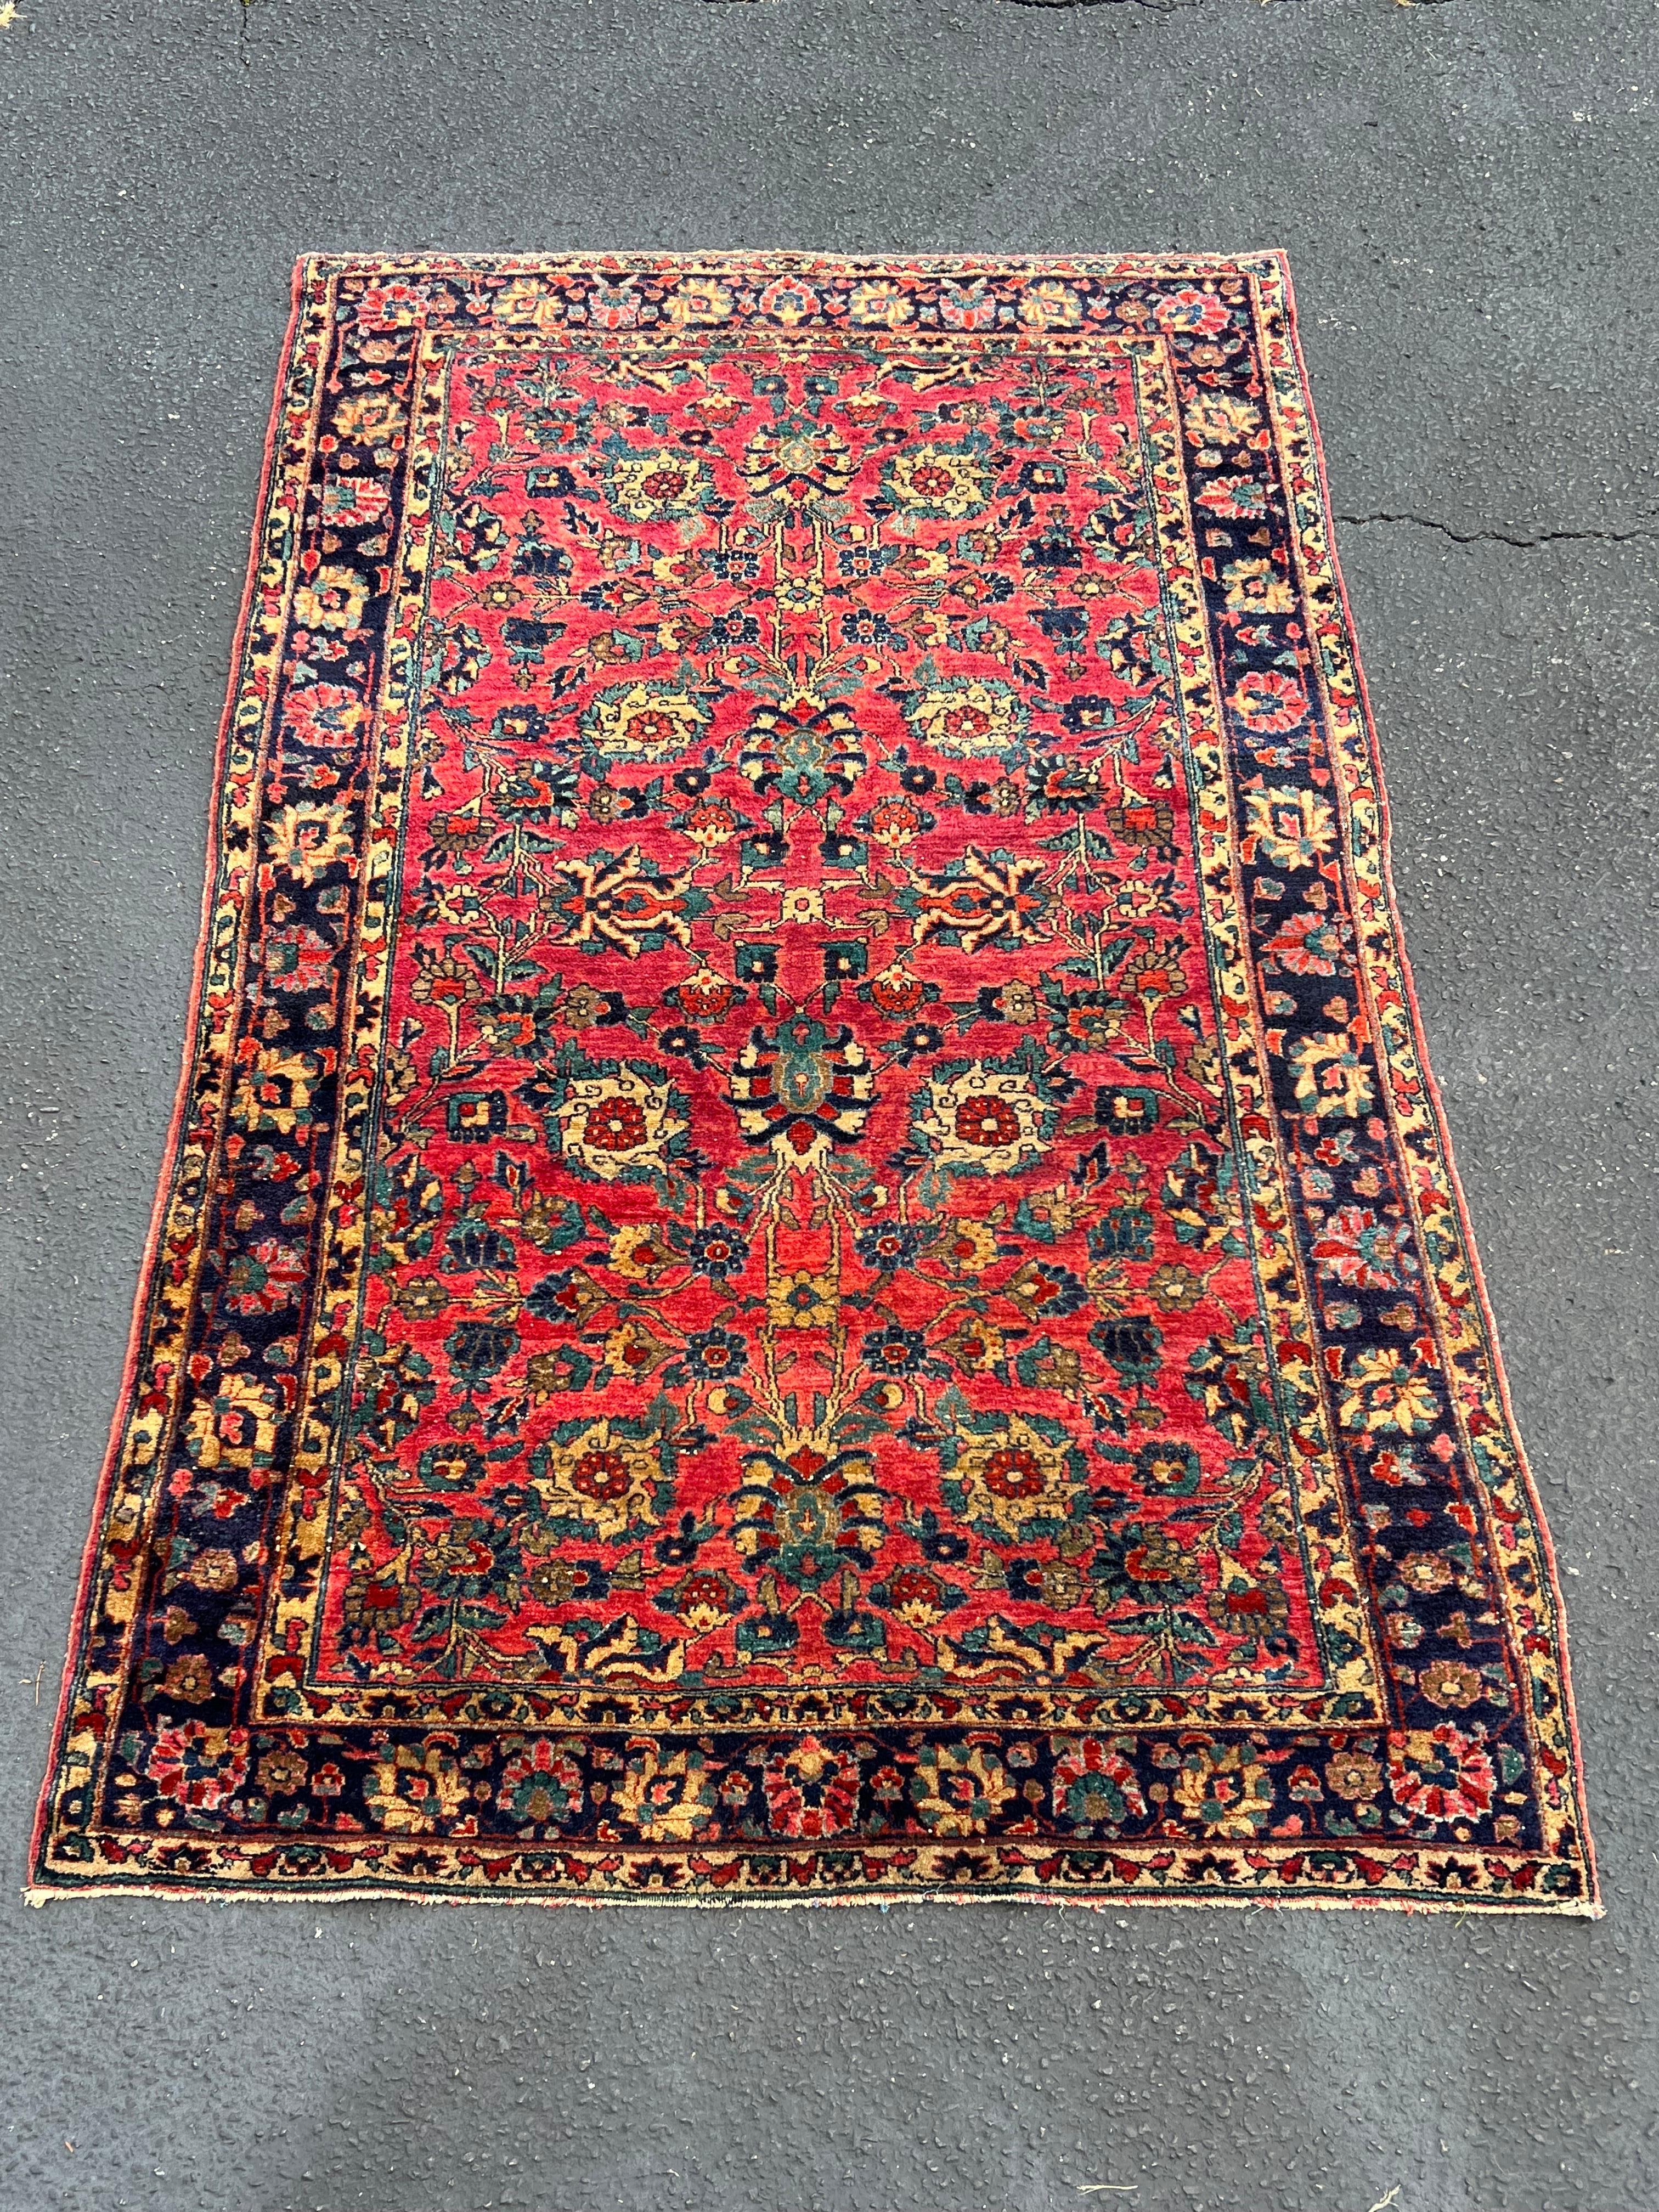 Vegetable Dyed Mid 20th Century Persian Rug 5' x 7' For Sale 1